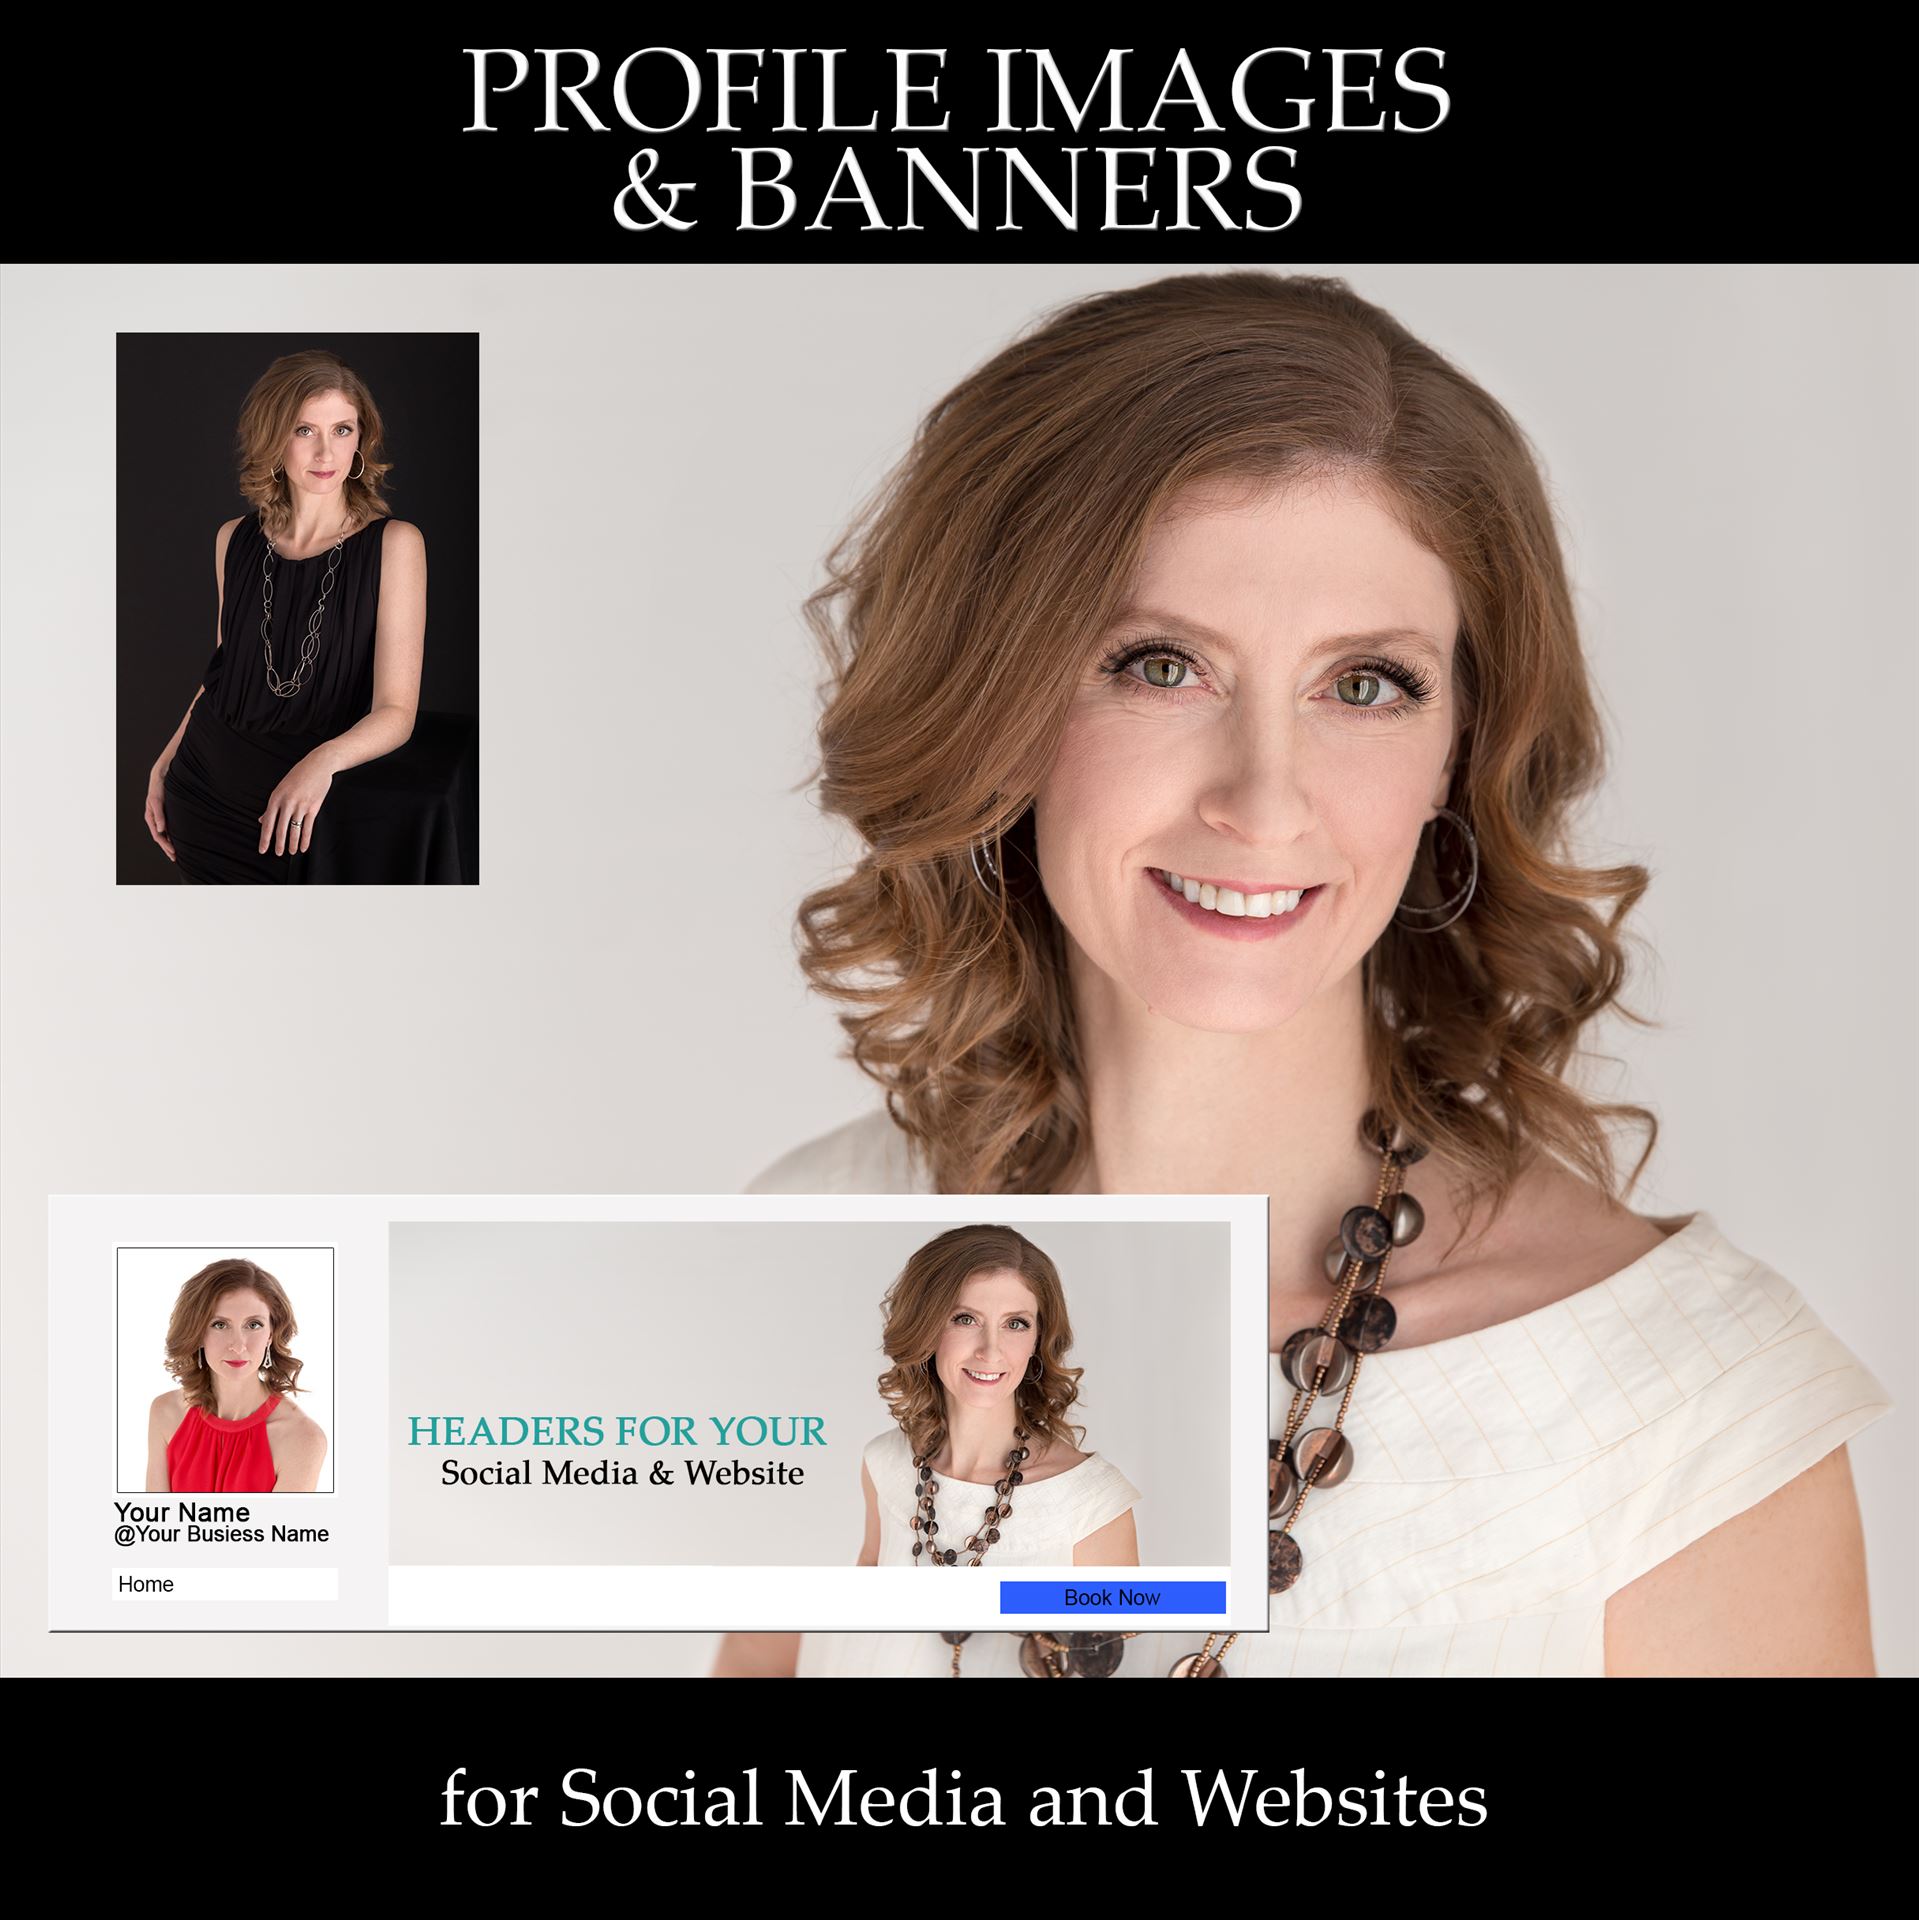 Profile-Images-and-Banners.jpg beauty portraits, beauty, portrait, headshot, personal branding by Maria Angelopoulos Photogrpahy